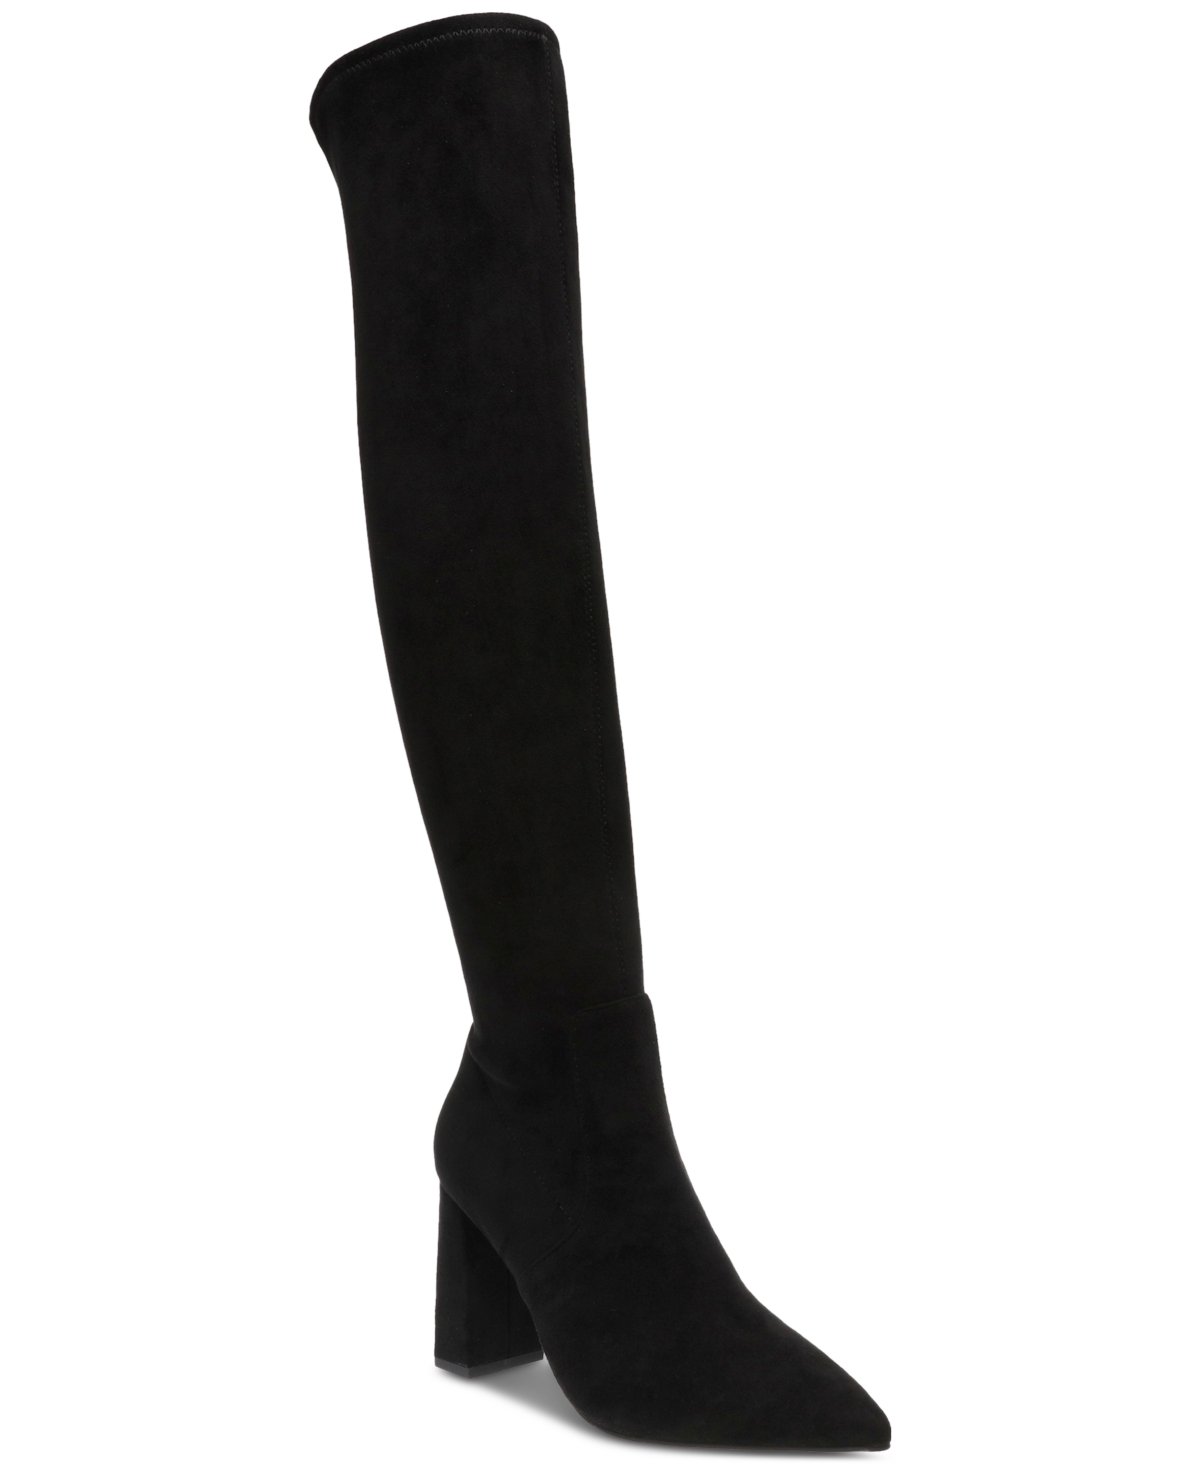 Eileene Pointed-Toe Block-Heel Over-The-Knee Boots, Created for Macy's - Black Micro